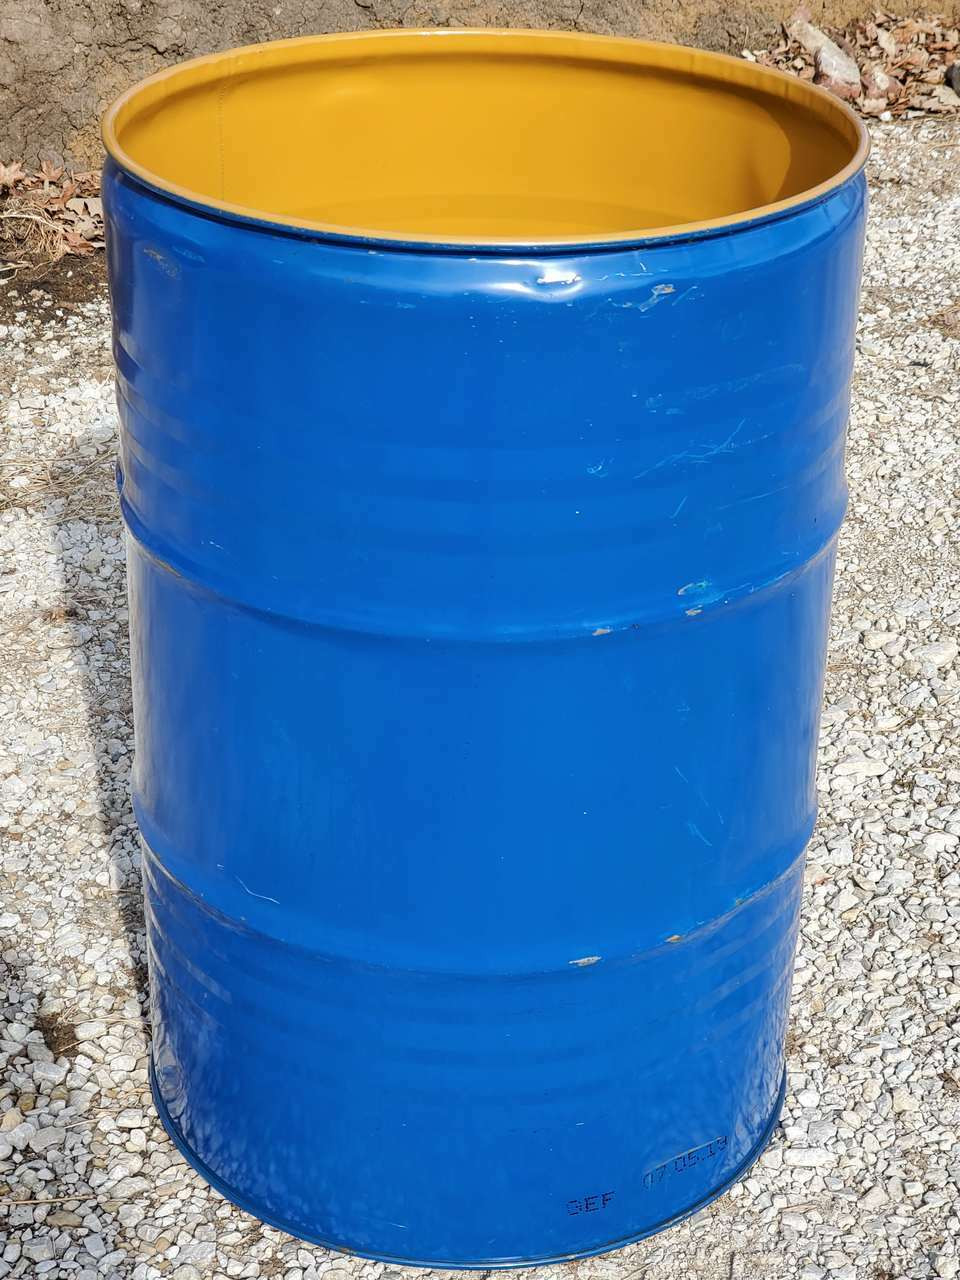 55 Gallon Steel Drums For Sale | Lappe's Bee Supply Honey